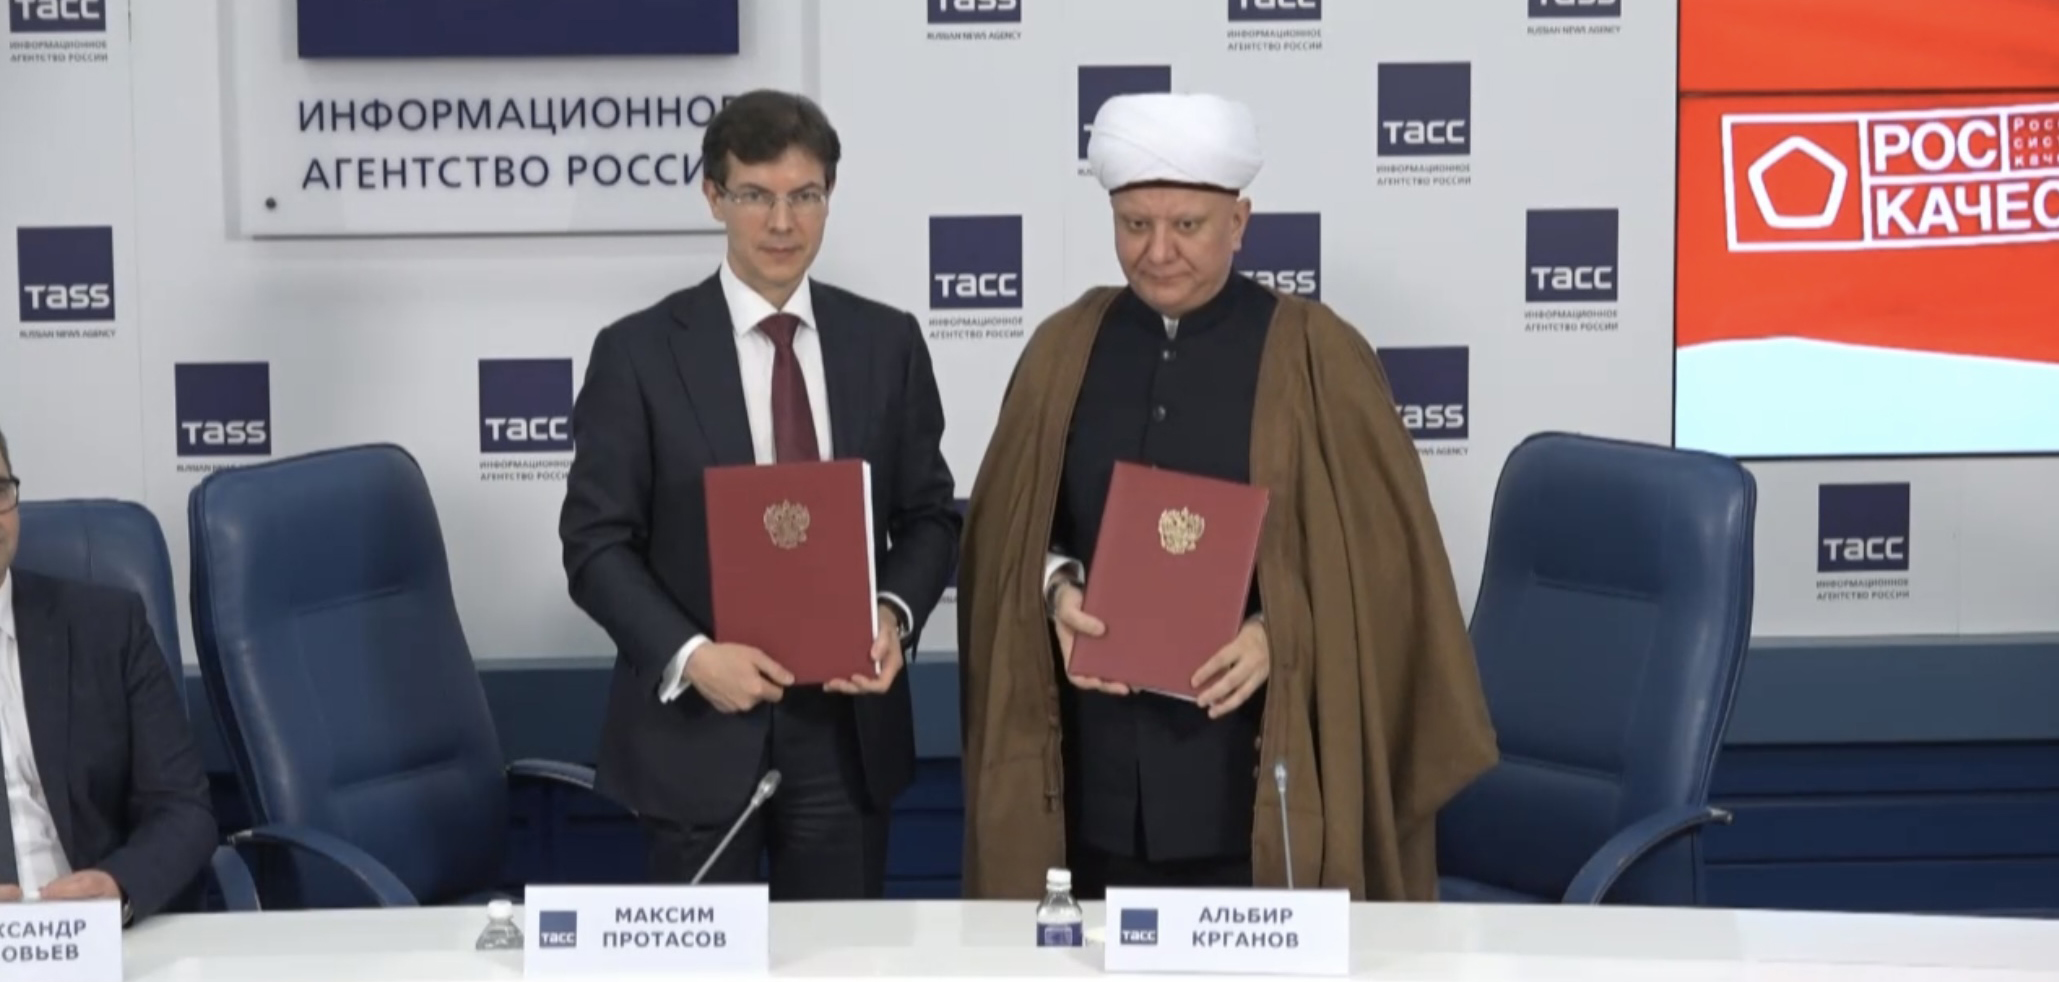 First time in history: Cooperation agreement on halal topic signed between state (Roskachestvo) and muslim organizations (Spiritual assembly of muslims of Russia)